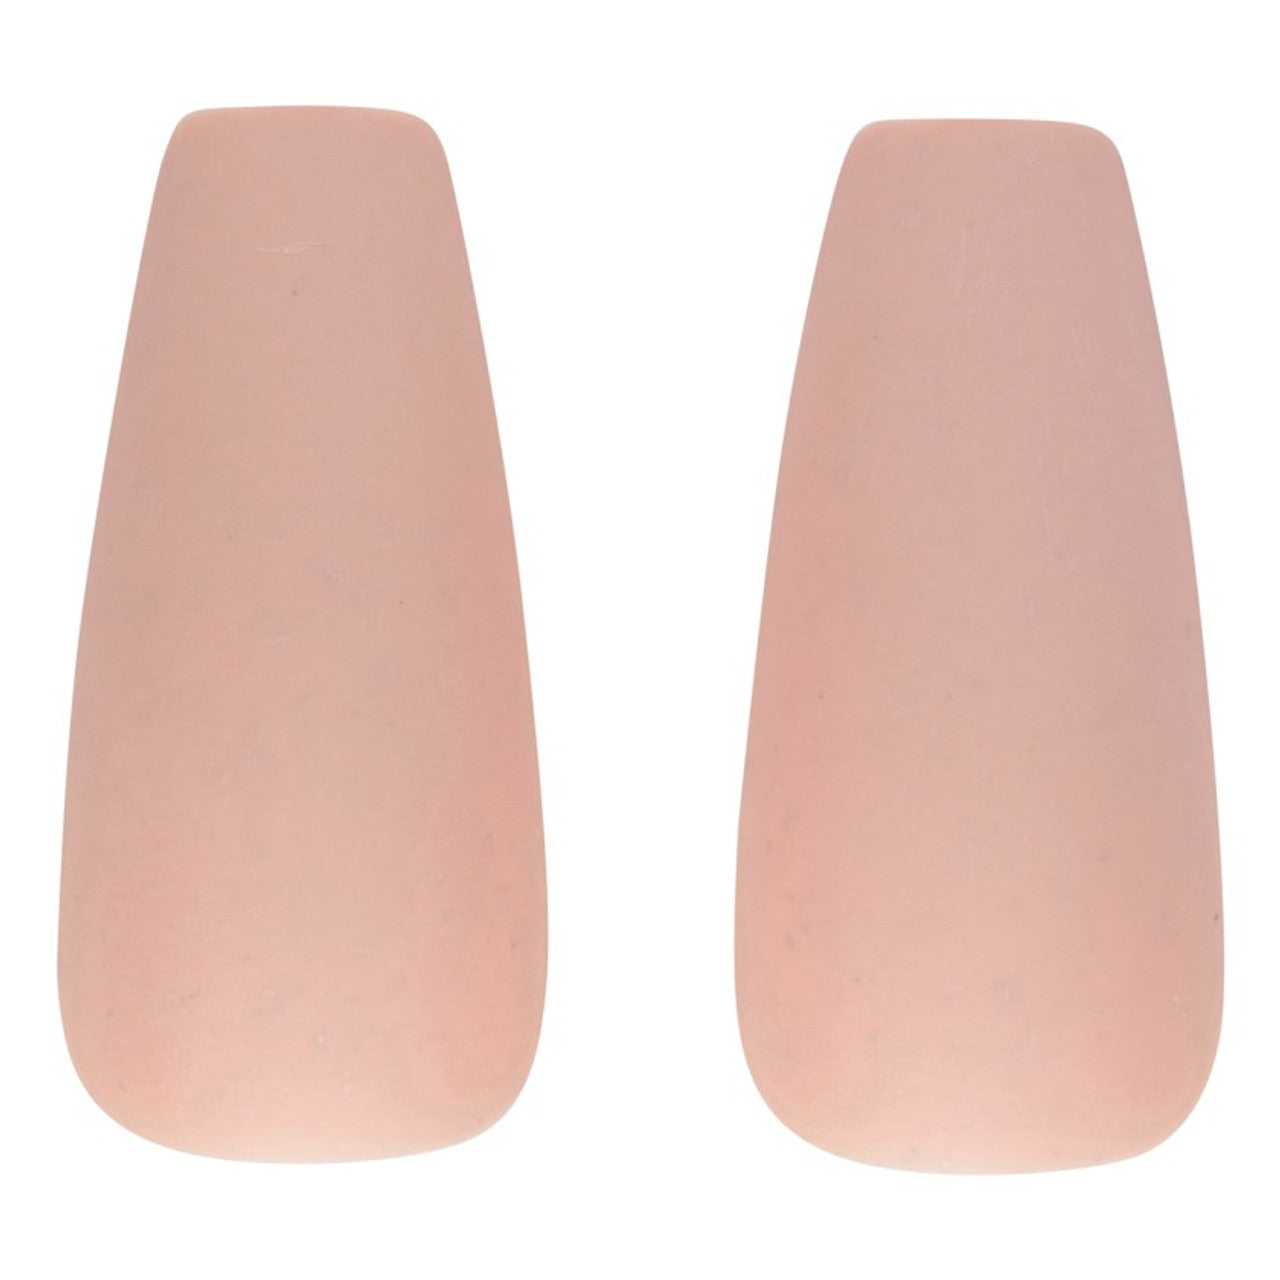 CALA-Nude-Matte-Finished-Press-On-Nails__56773.jpg